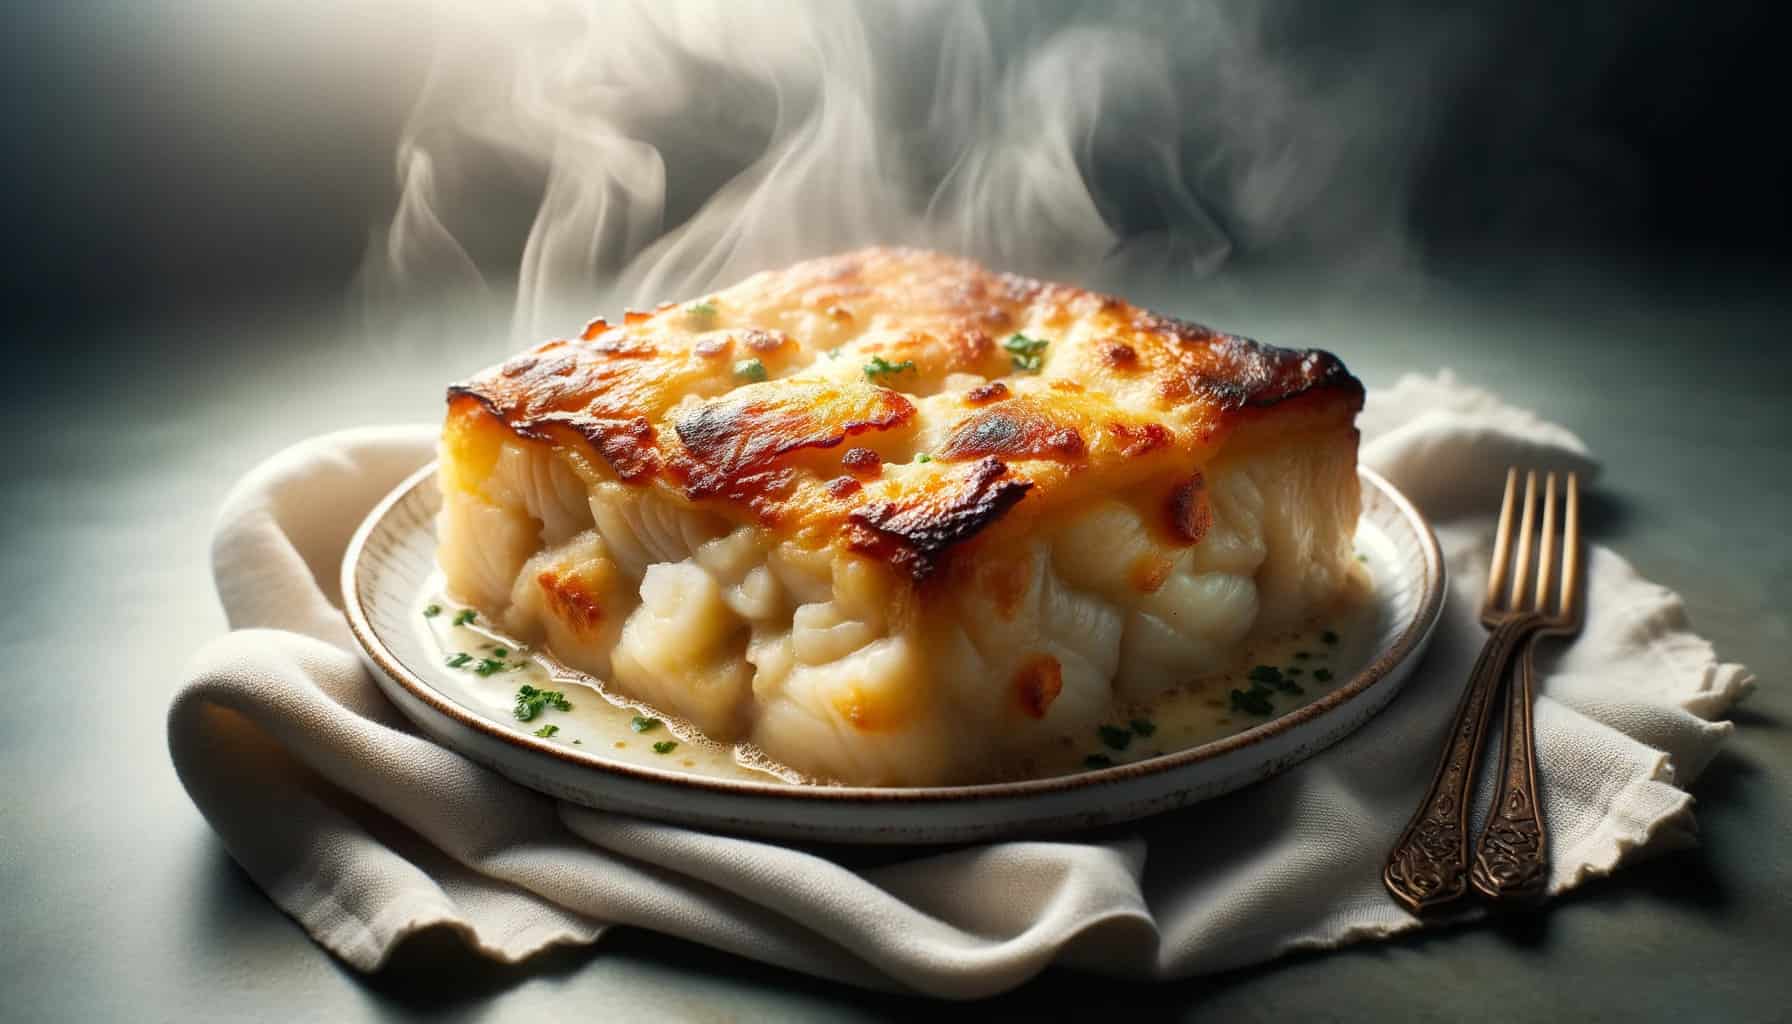 Bacalhau à gomes de sá (codfish casserole) presented on a white porcelain plate. The casserole's surface is slightly browned, suggesting a crisp top layer, while steam rises gently, hinting at its hot and flavorful interior.